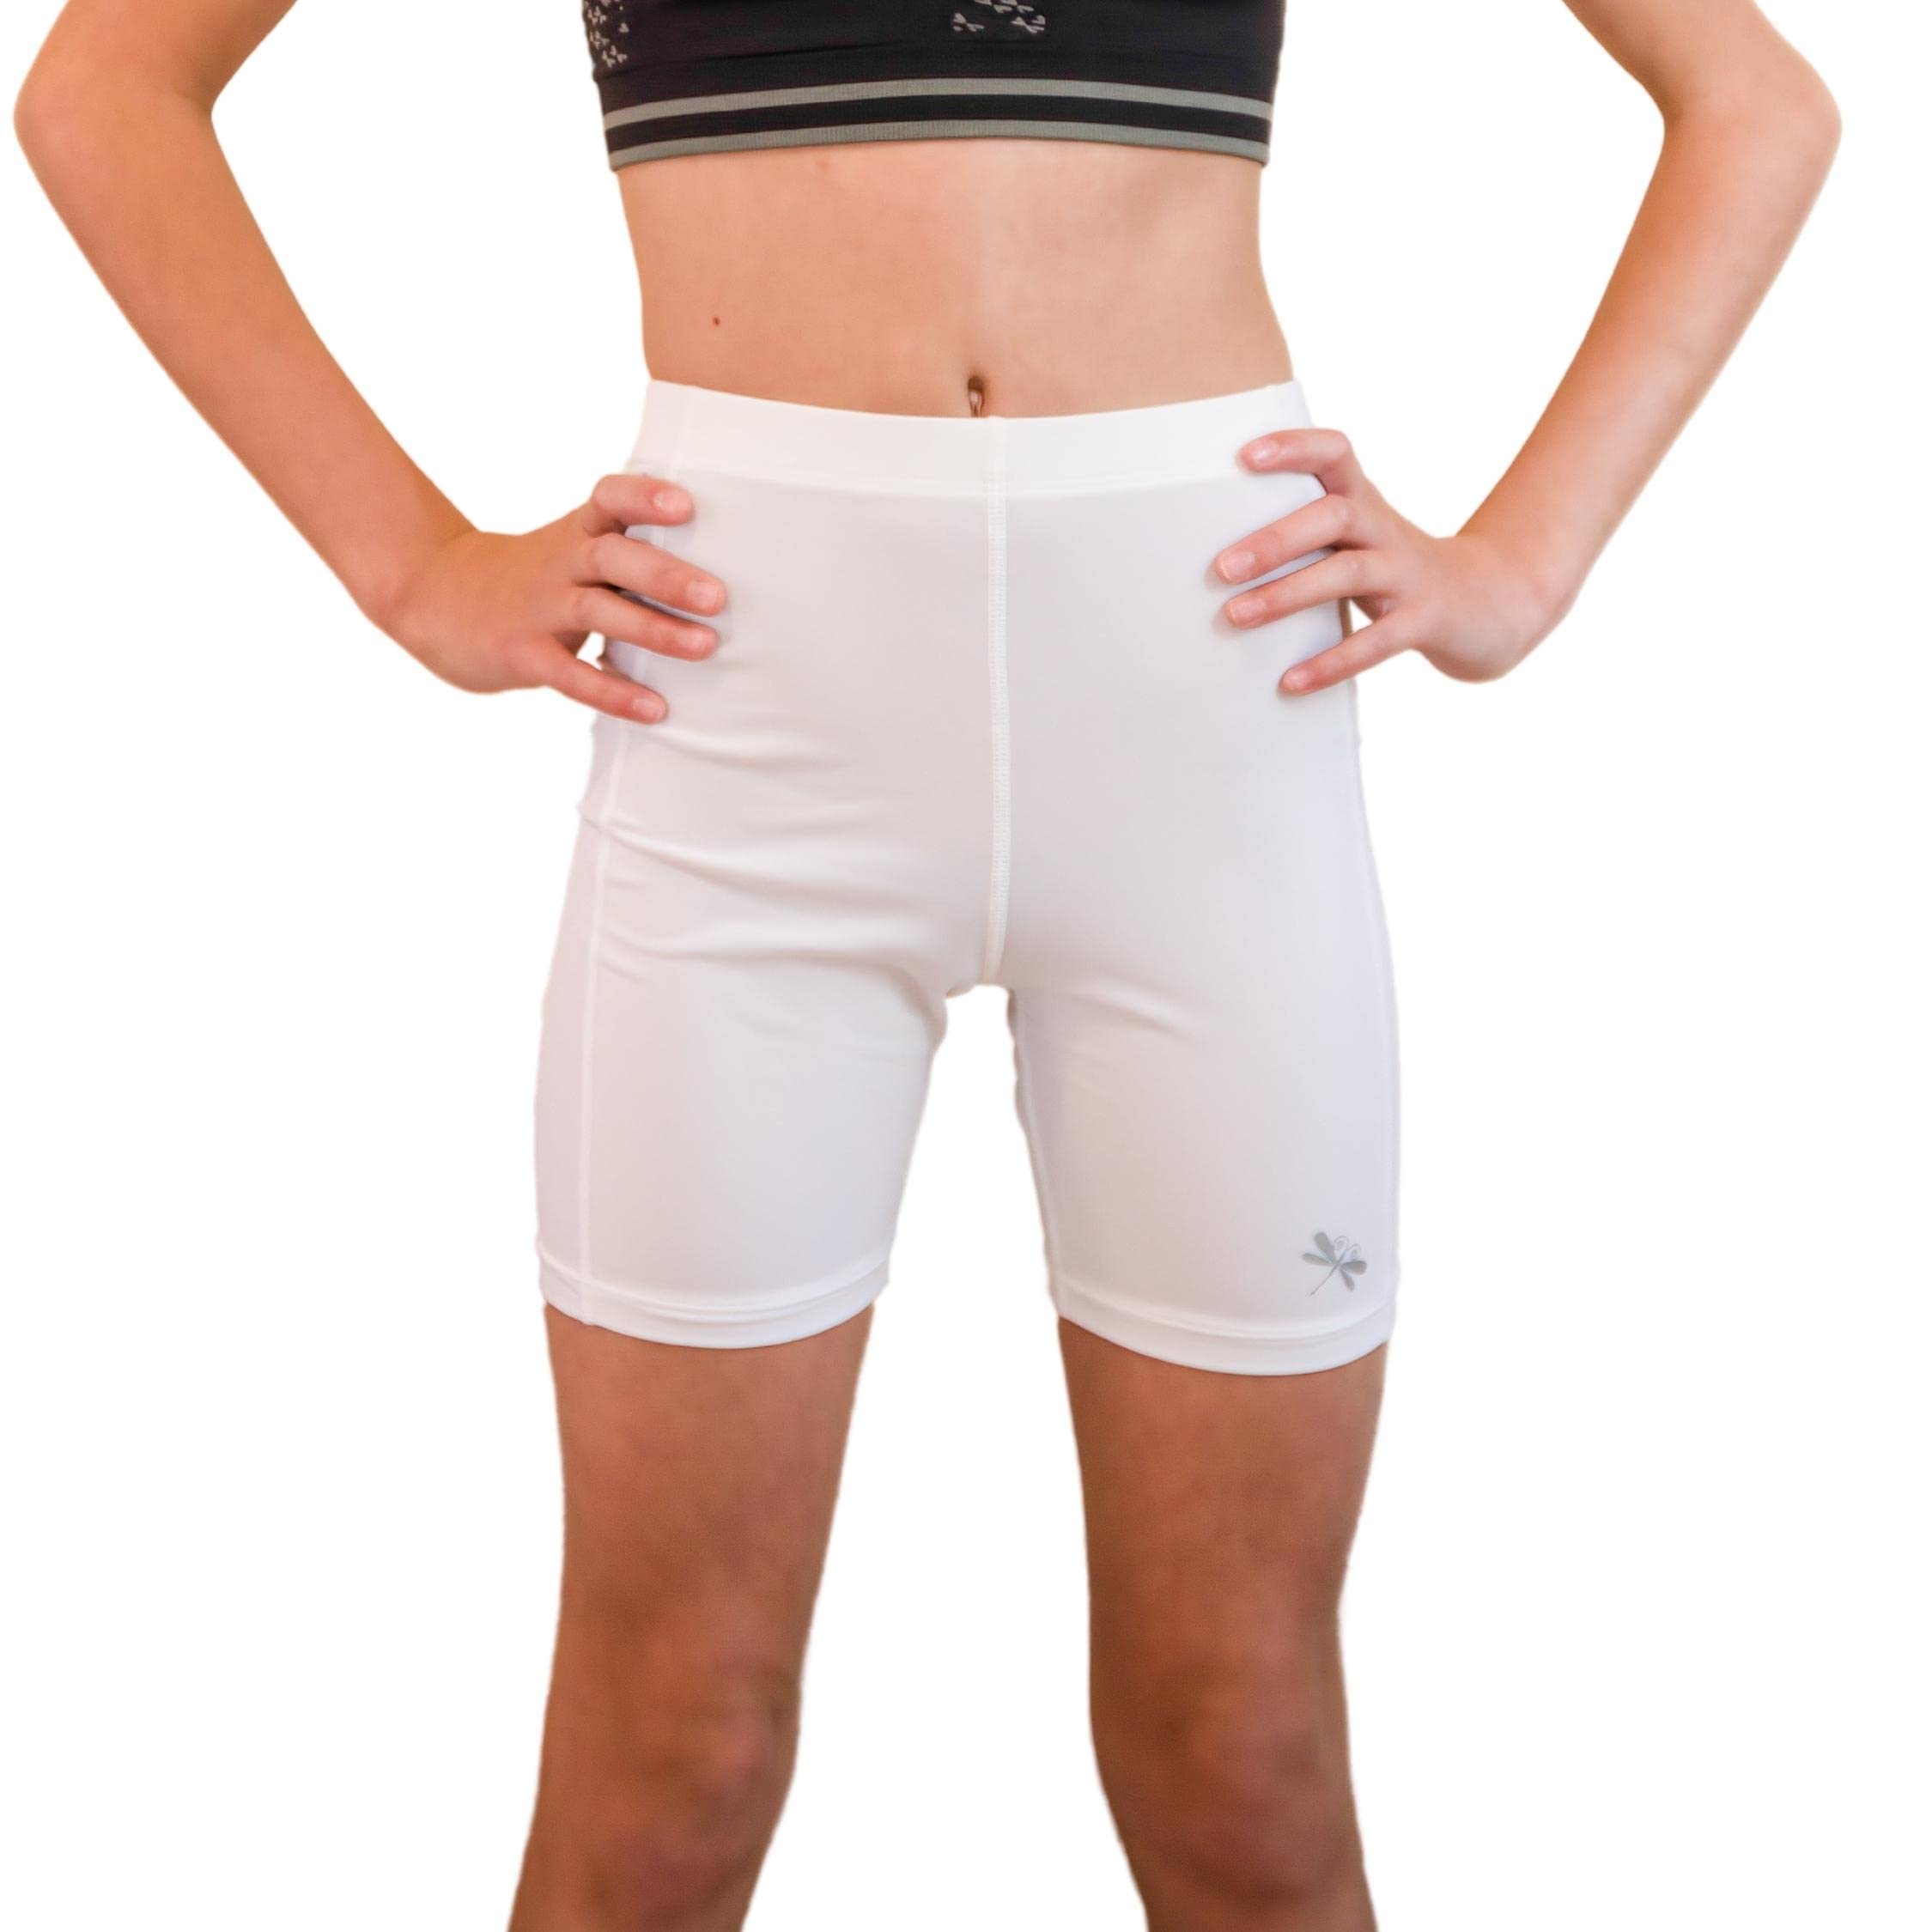 Dragonwing girlgear Girls Mid-Rise Compression Shorts - 5 Inseam (for  Active Teen and Tween Girls) 10 White